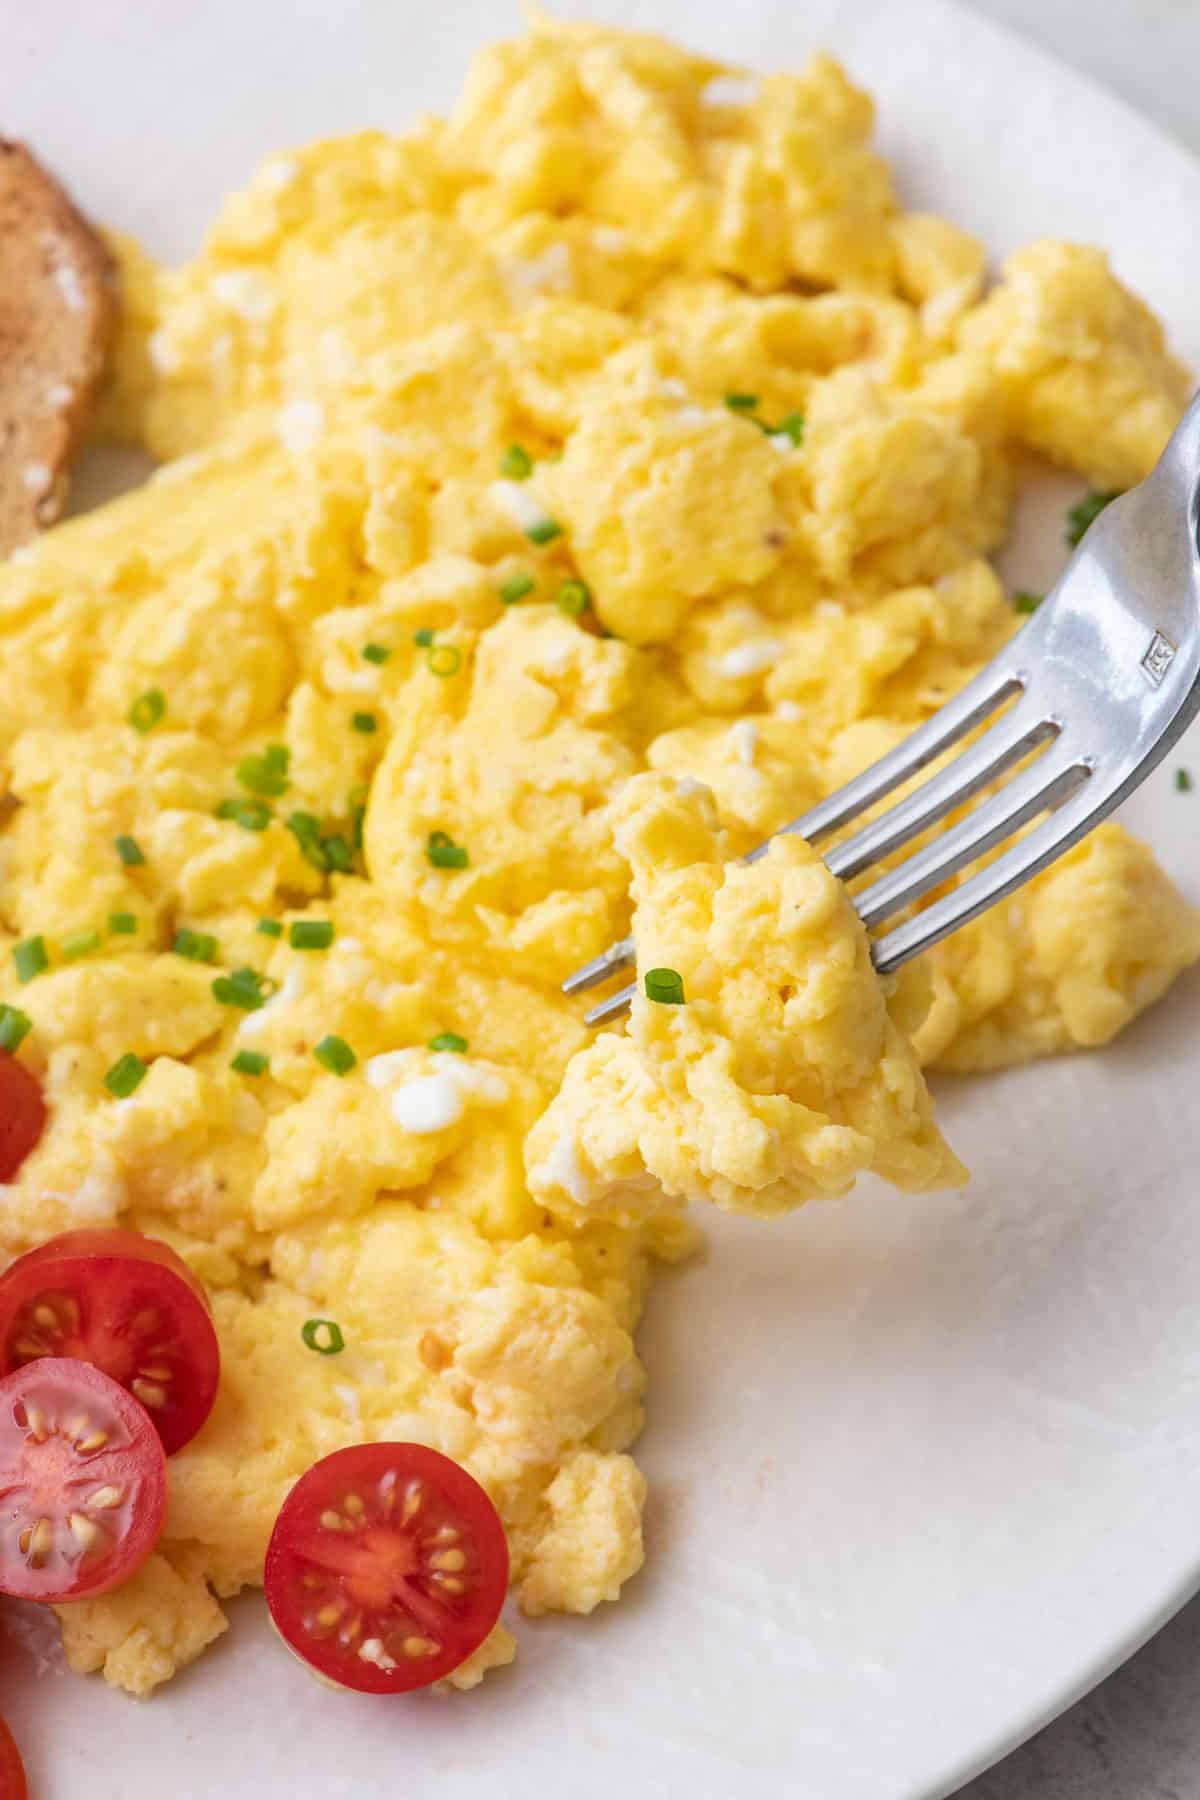 Close up of a fork scooping up some cottage cheese scrambled eggs garnished with chives and a few tomato halves.